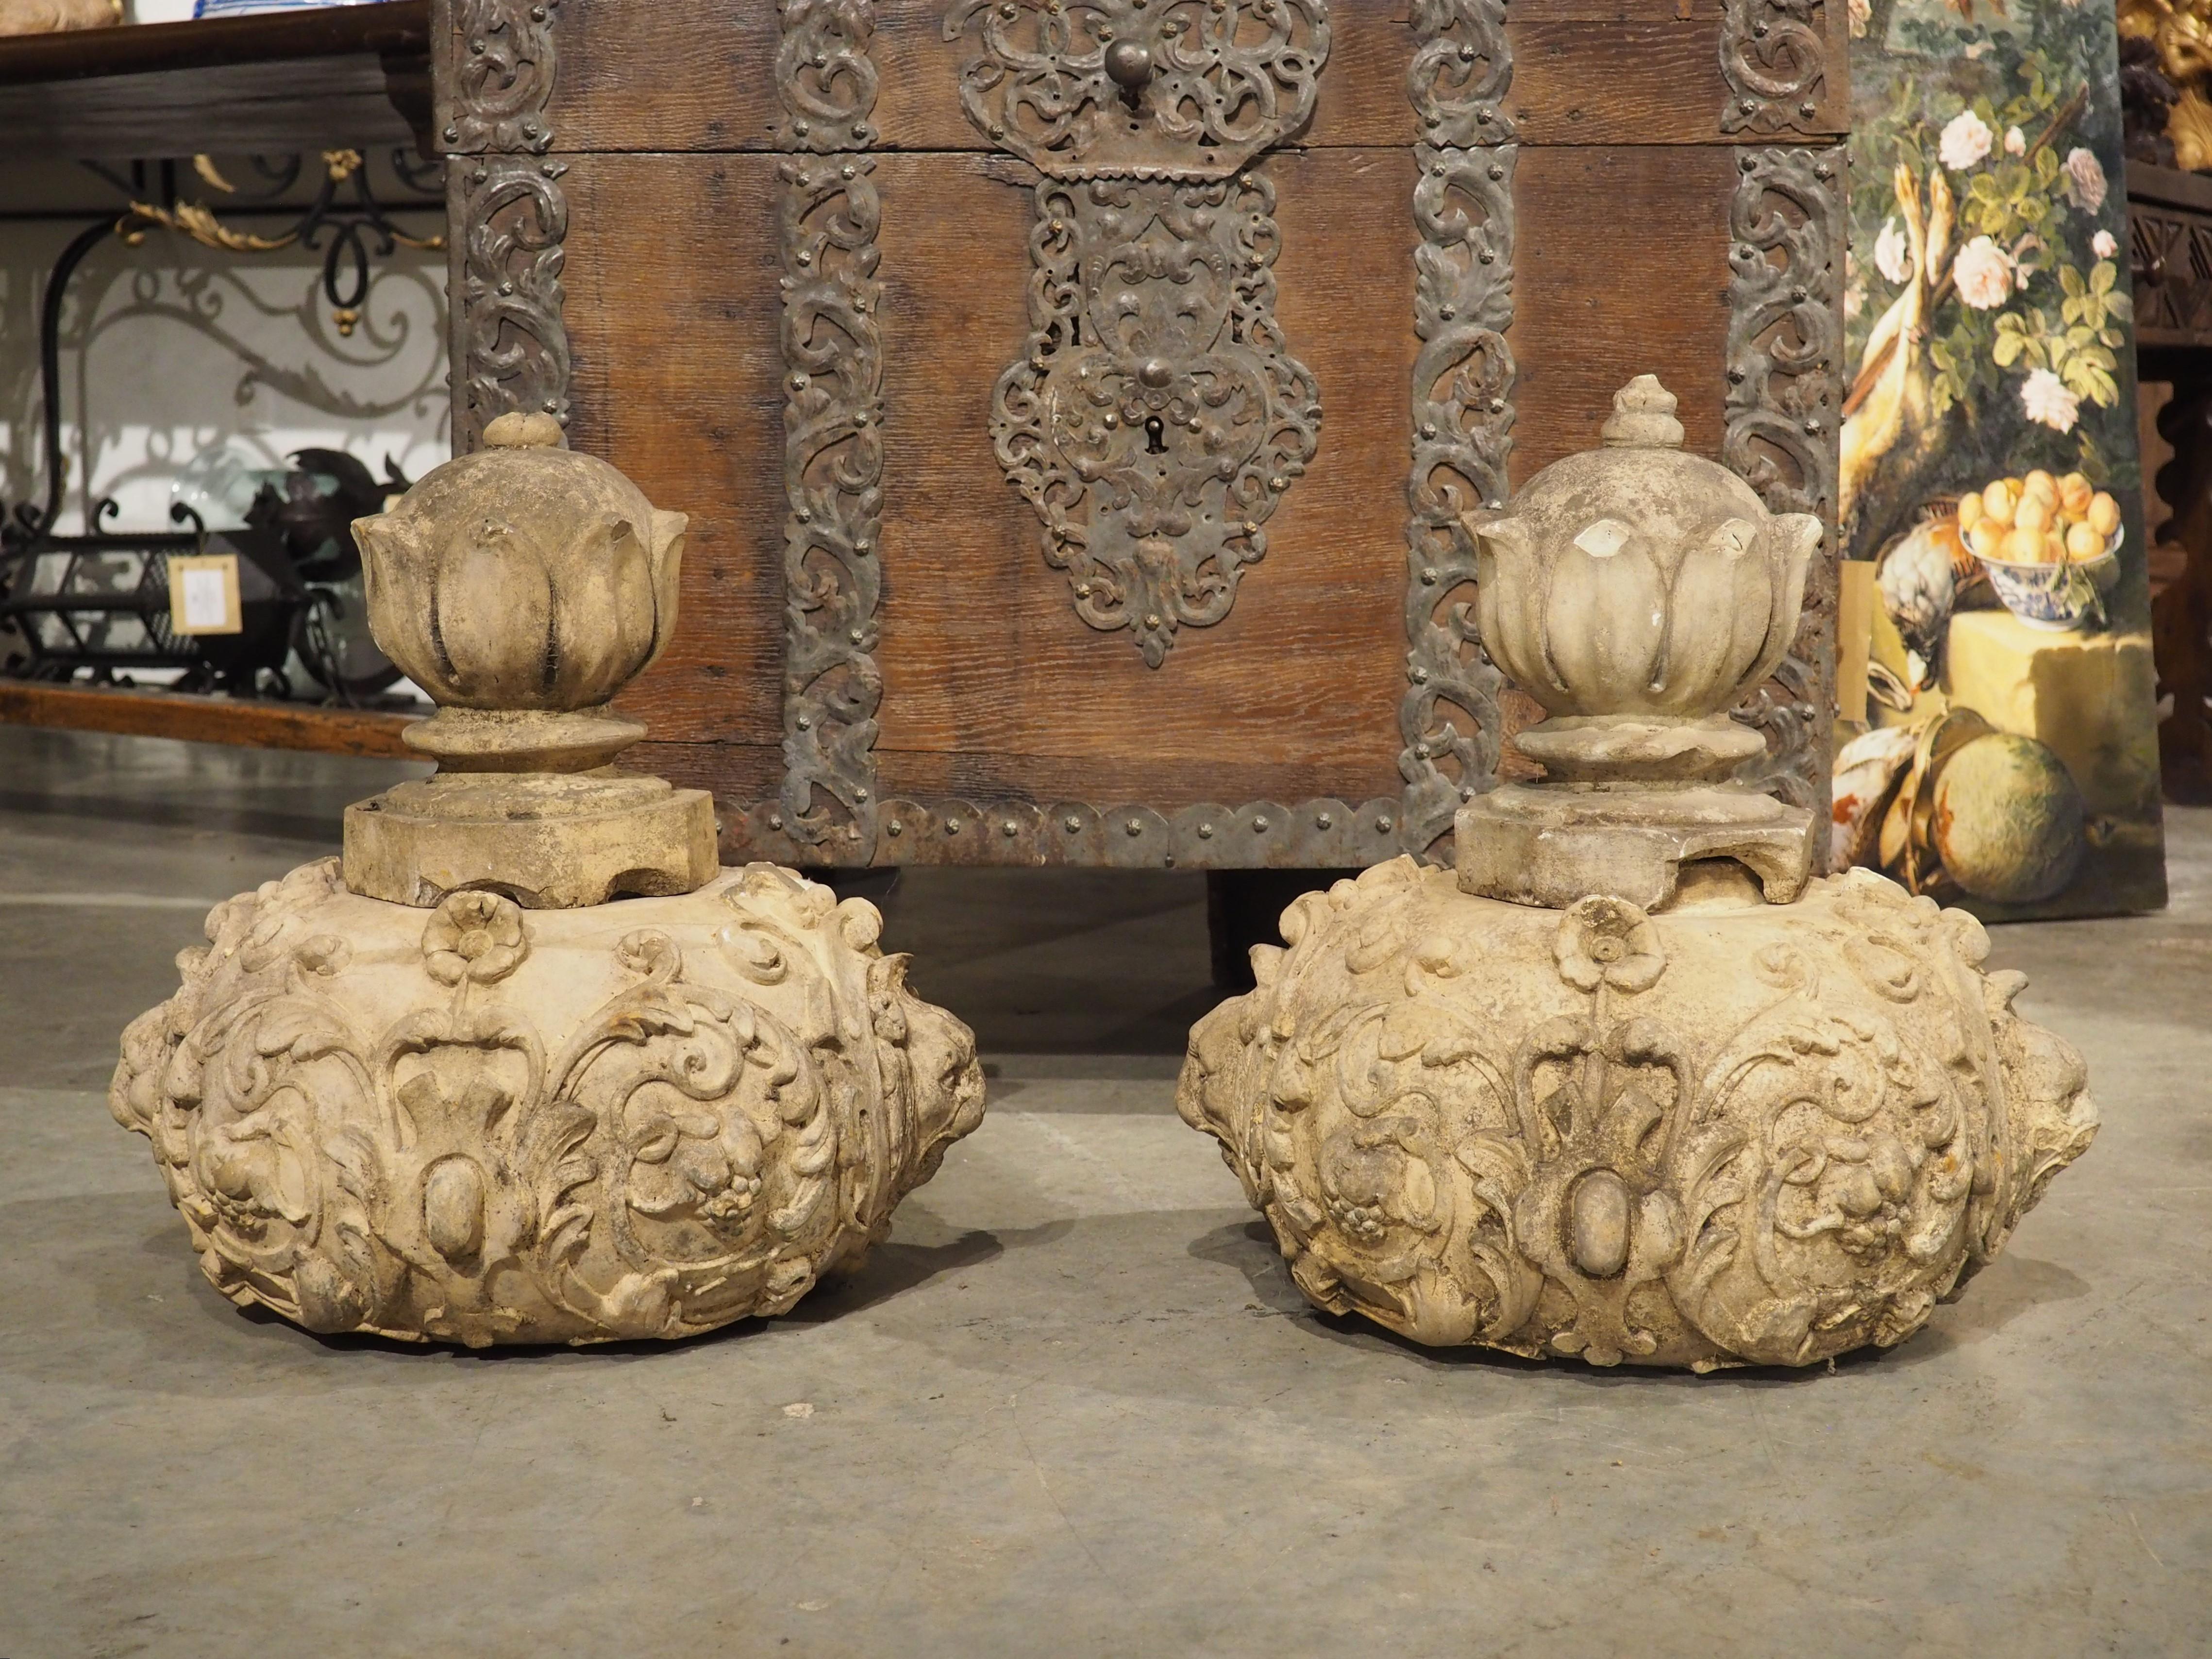 Recently discovered at a property in the outskirts of Paris where they were used as garden ornaments (they were most likely originally part of larger garden urns or an architectural installation), this pair of terra cotta finial elements date to